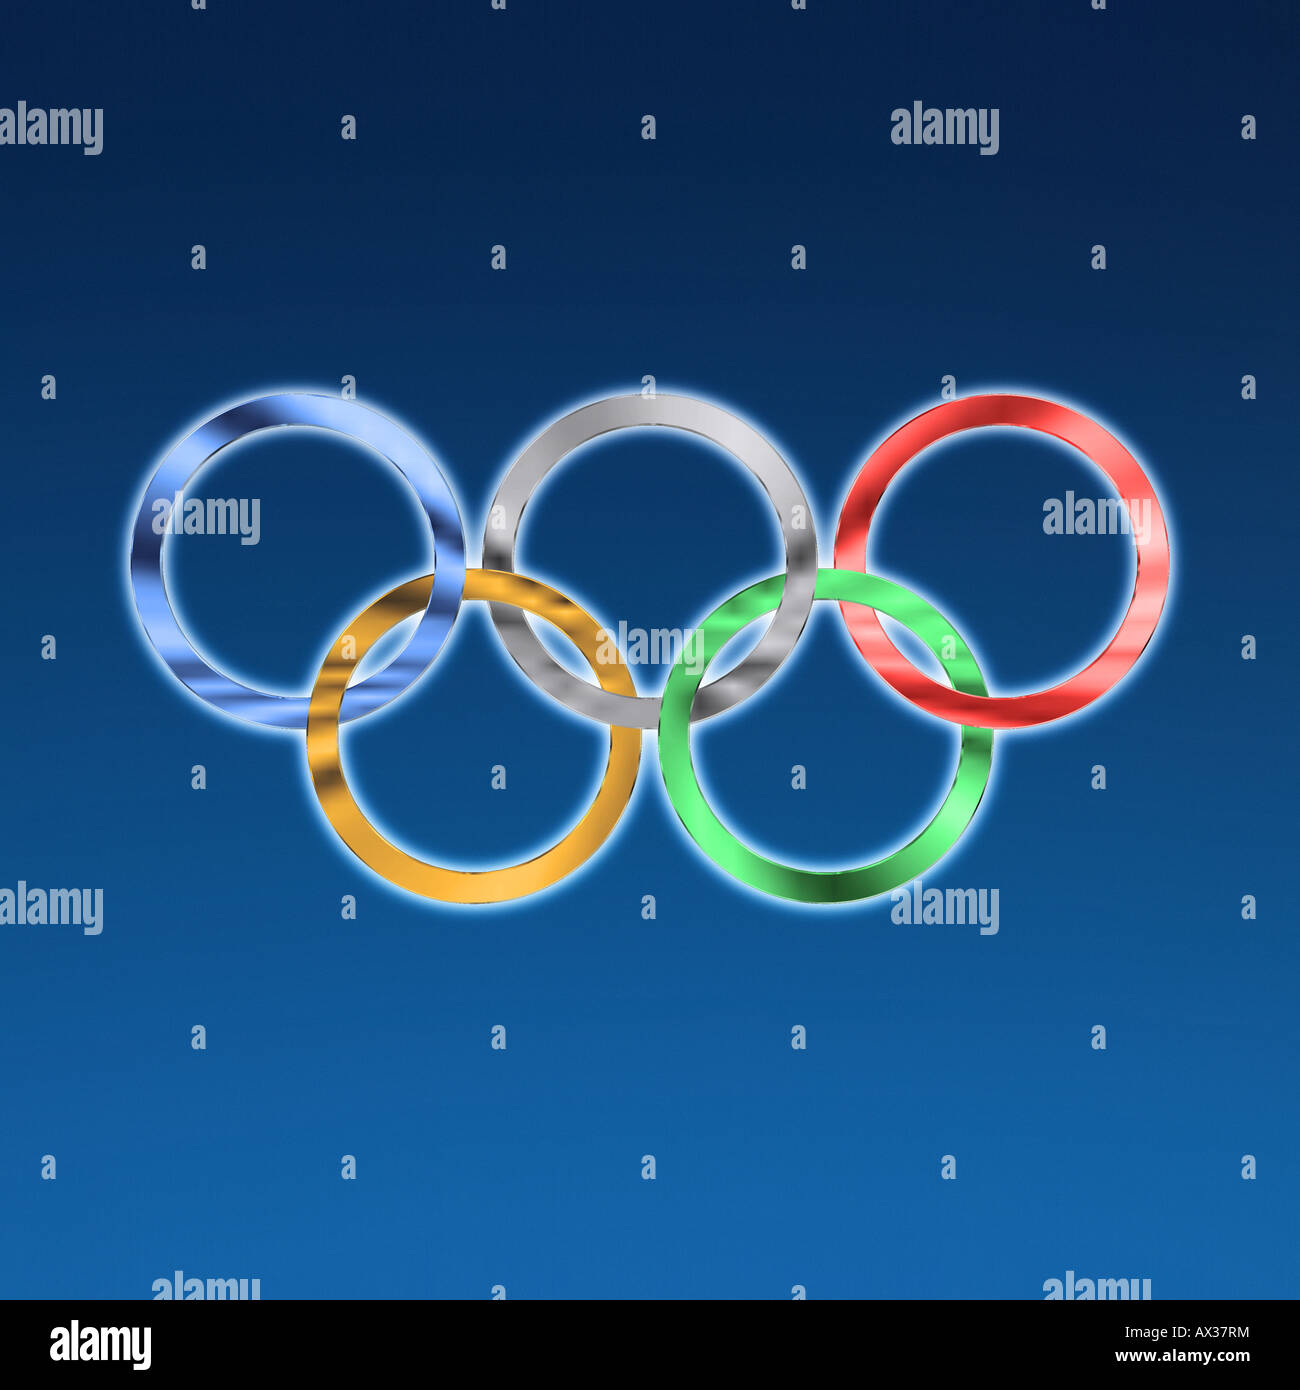 Olympic rings surrounded by glowing edges against deep blue gradated background Stock Photo